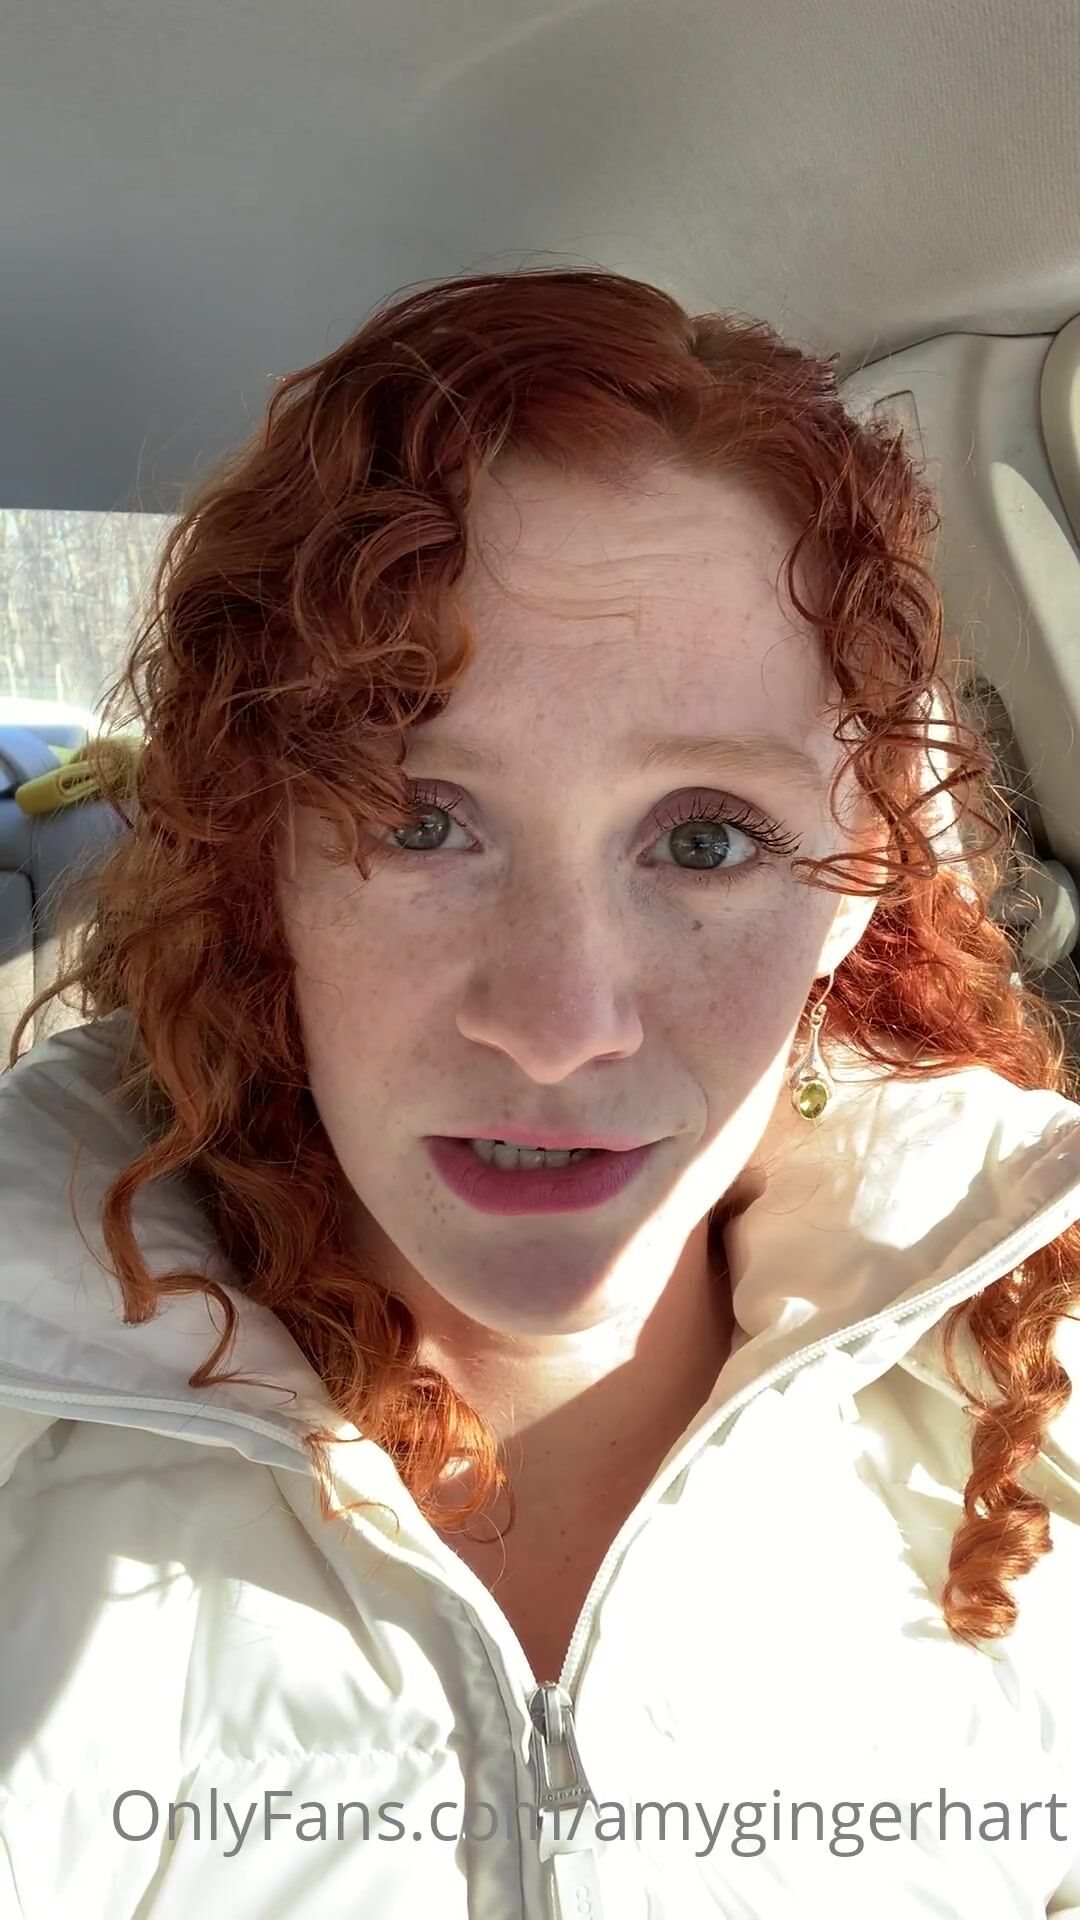 Watch Online Amy Hart Aka Amygingerhart OnlyFans Sharing My Deepest Heart With You Today